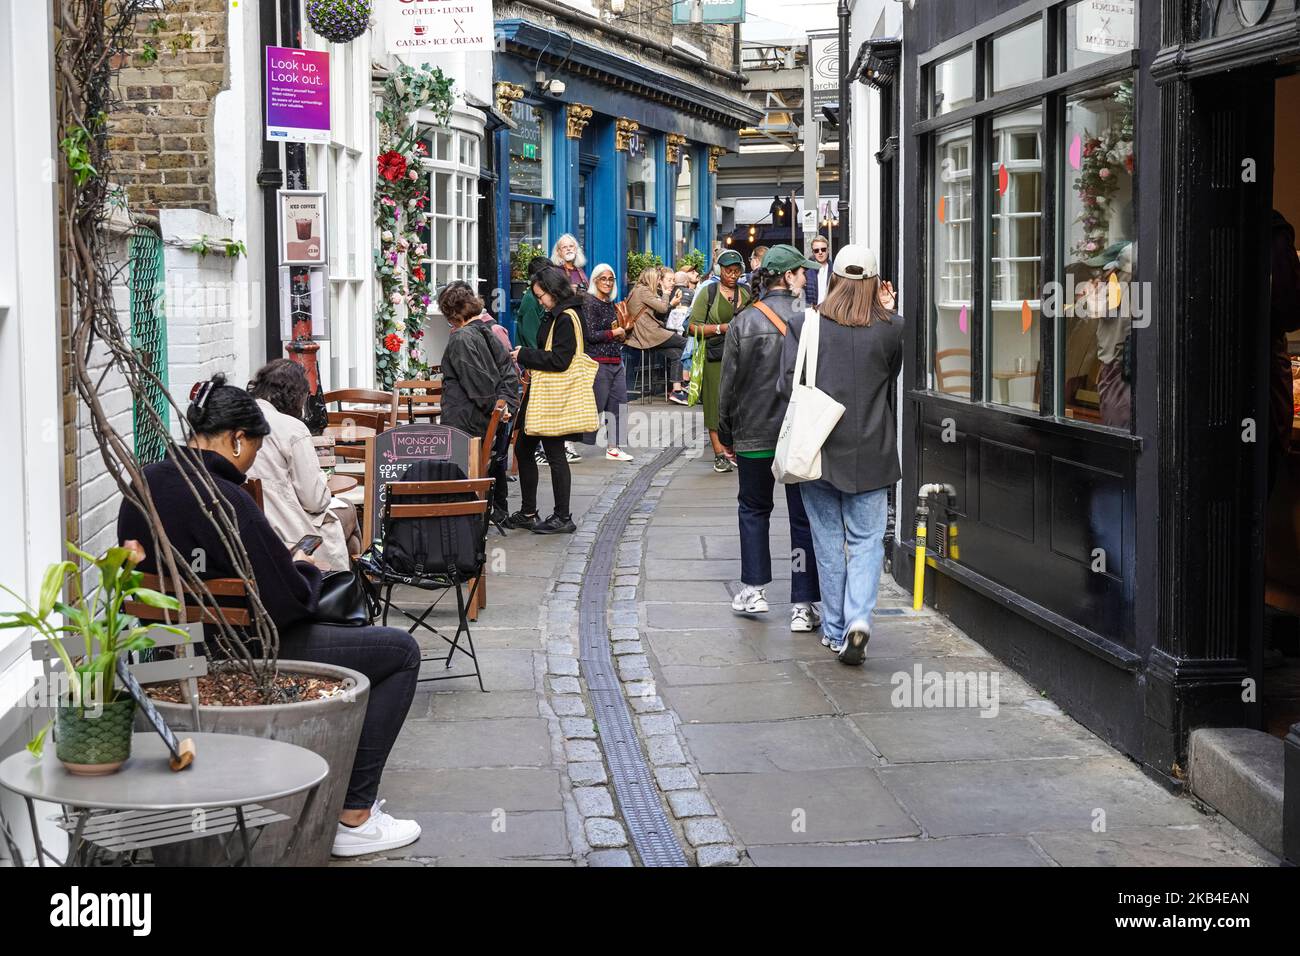 Tourists visiting shops and cafes on Turnpin Lane, narrow street leading to the Greenwich Market, London England United Kingdom UK Stock Photo